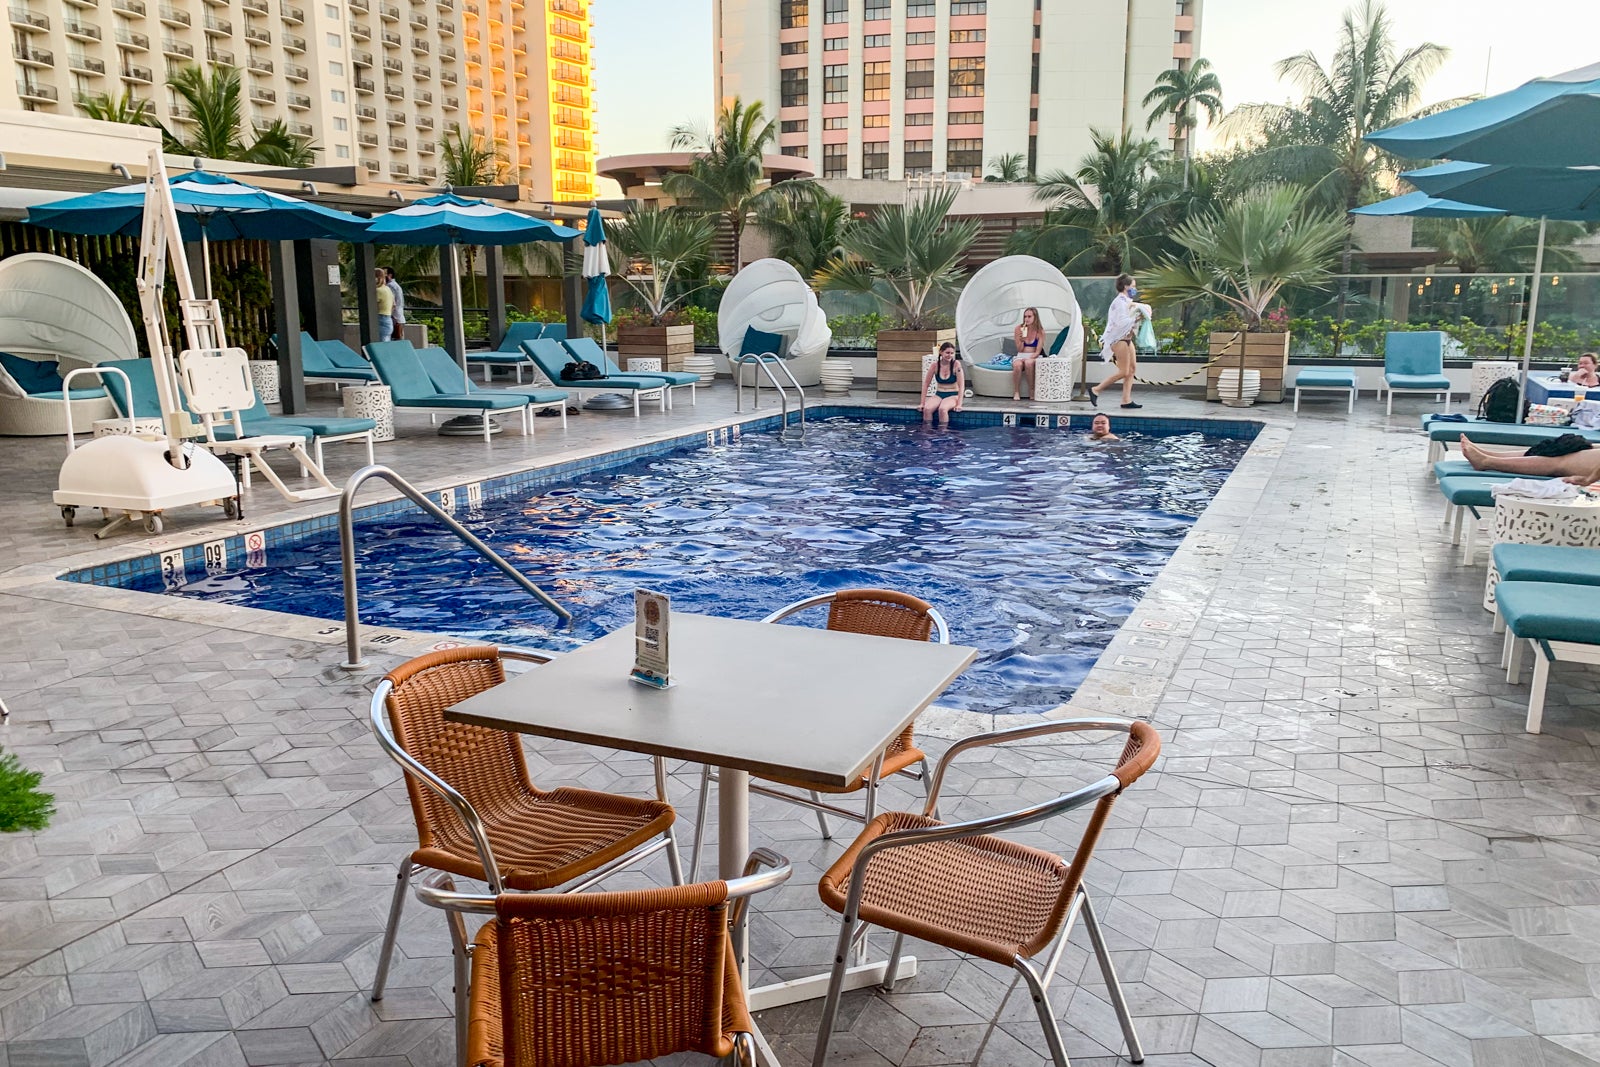 guests lounge around a hotel pool